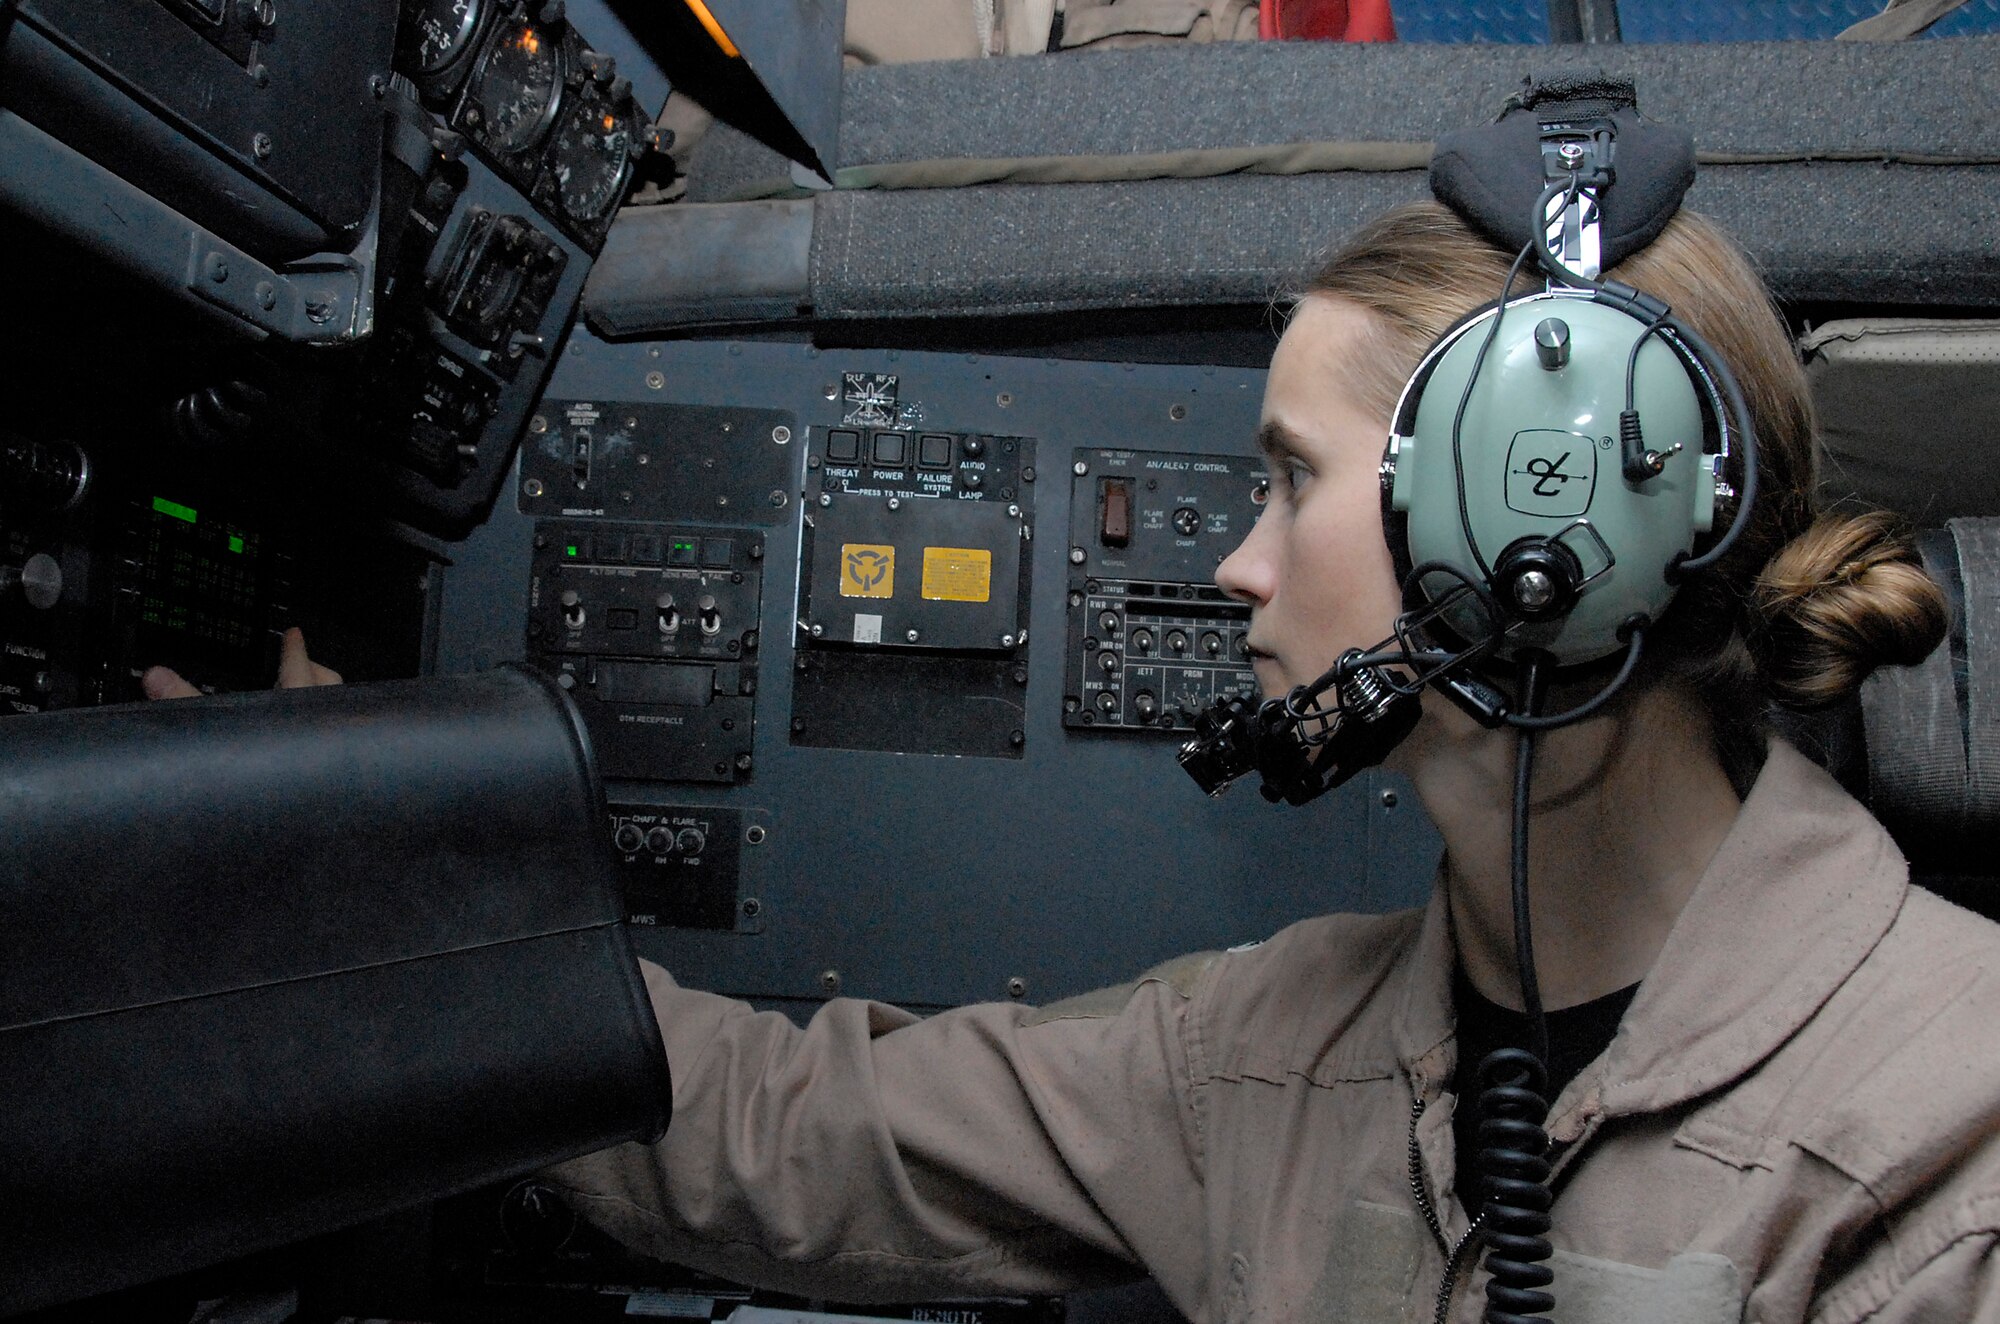 SOUTHWEST ASIA -- First Lt. Heather Hittler, an Air Force C-130 Hercules navigator deployed with the 737th Expeditionary Airlift Squadron, plugs in navigational information into a computer in preparation for departure from an air base in the Persian Gulf Region in May 2008. This mission dropped several hundred thousand leaflets over an Iraqi city. Lieutenant Hittler is deployed from Dyess Air Force Base, Texas. (U.S. Air Force photo/Tech. Sgt. Michael O’Connor)